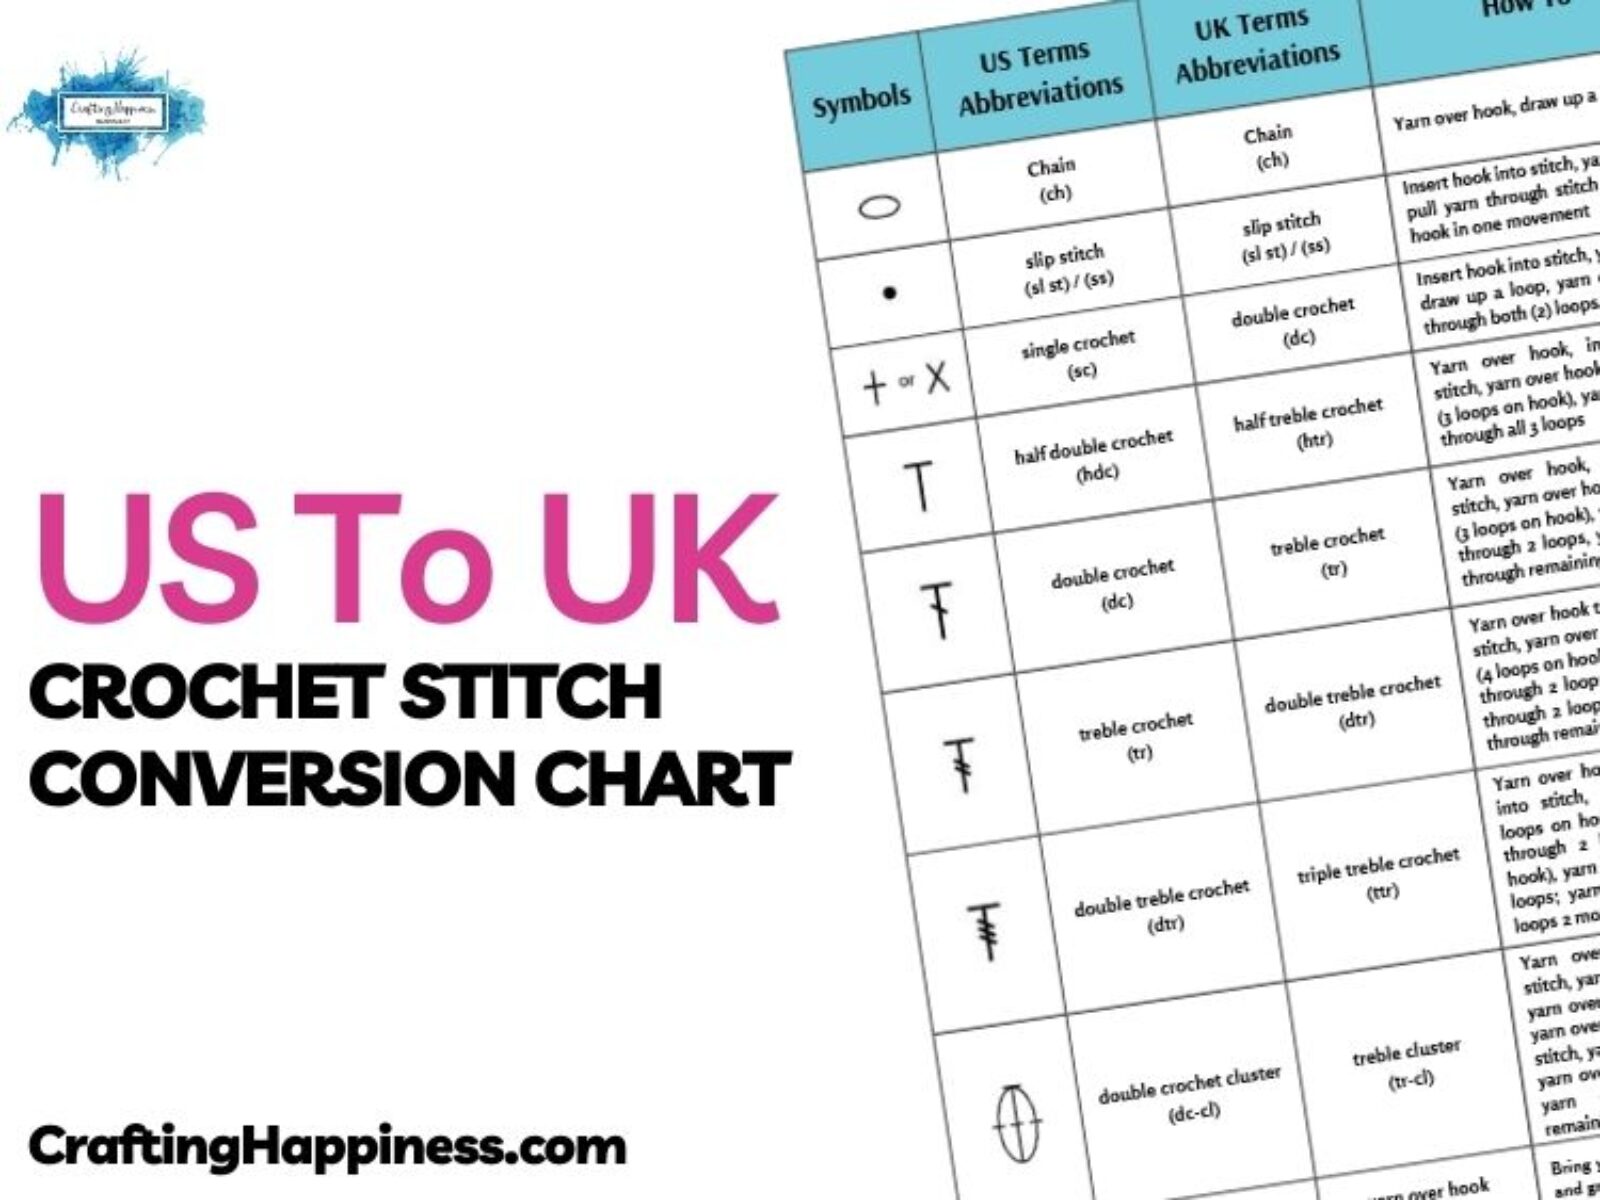 FB POSTER - US To UK Crochet Stitch Conversion Chart Crafting Happiness